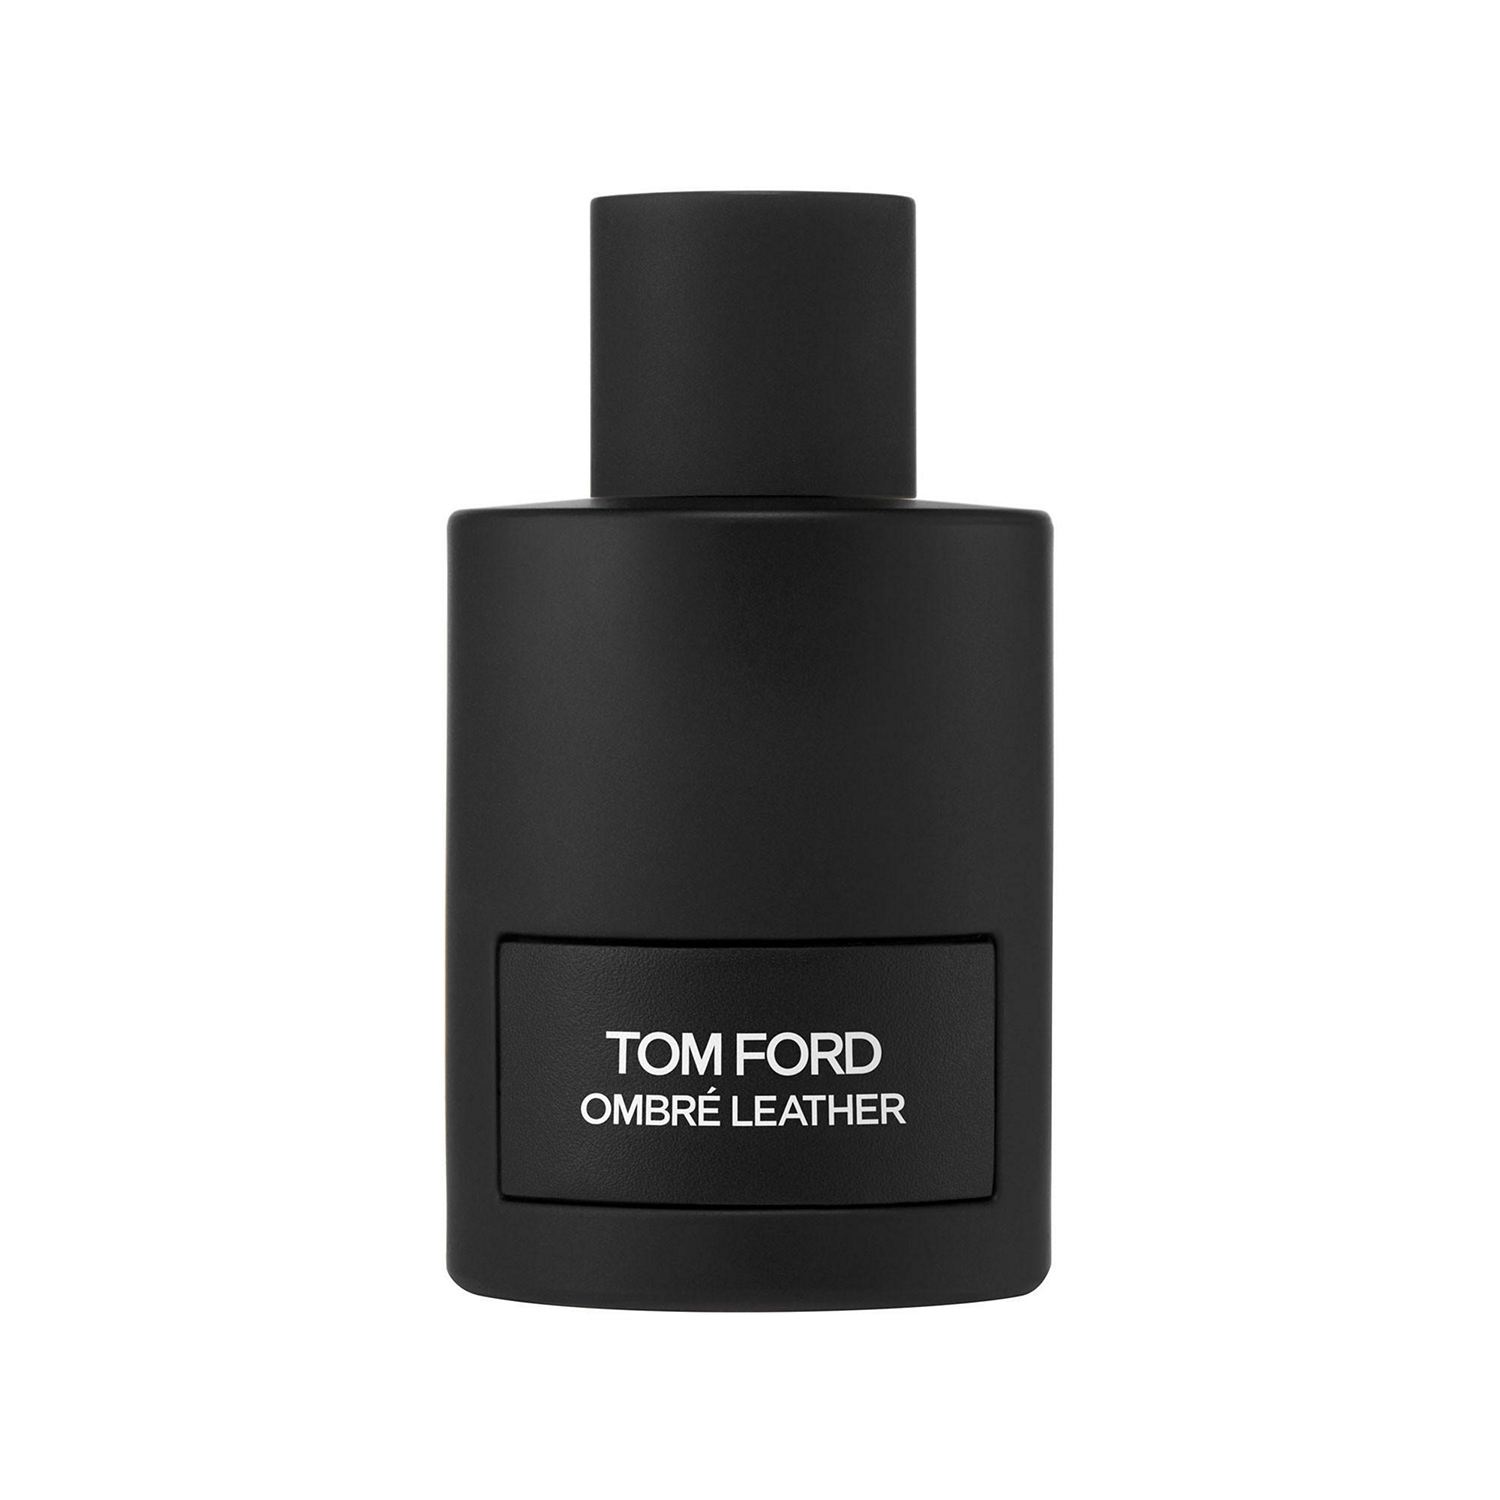 Tom Ford – Ombre Leather EDP 100ml